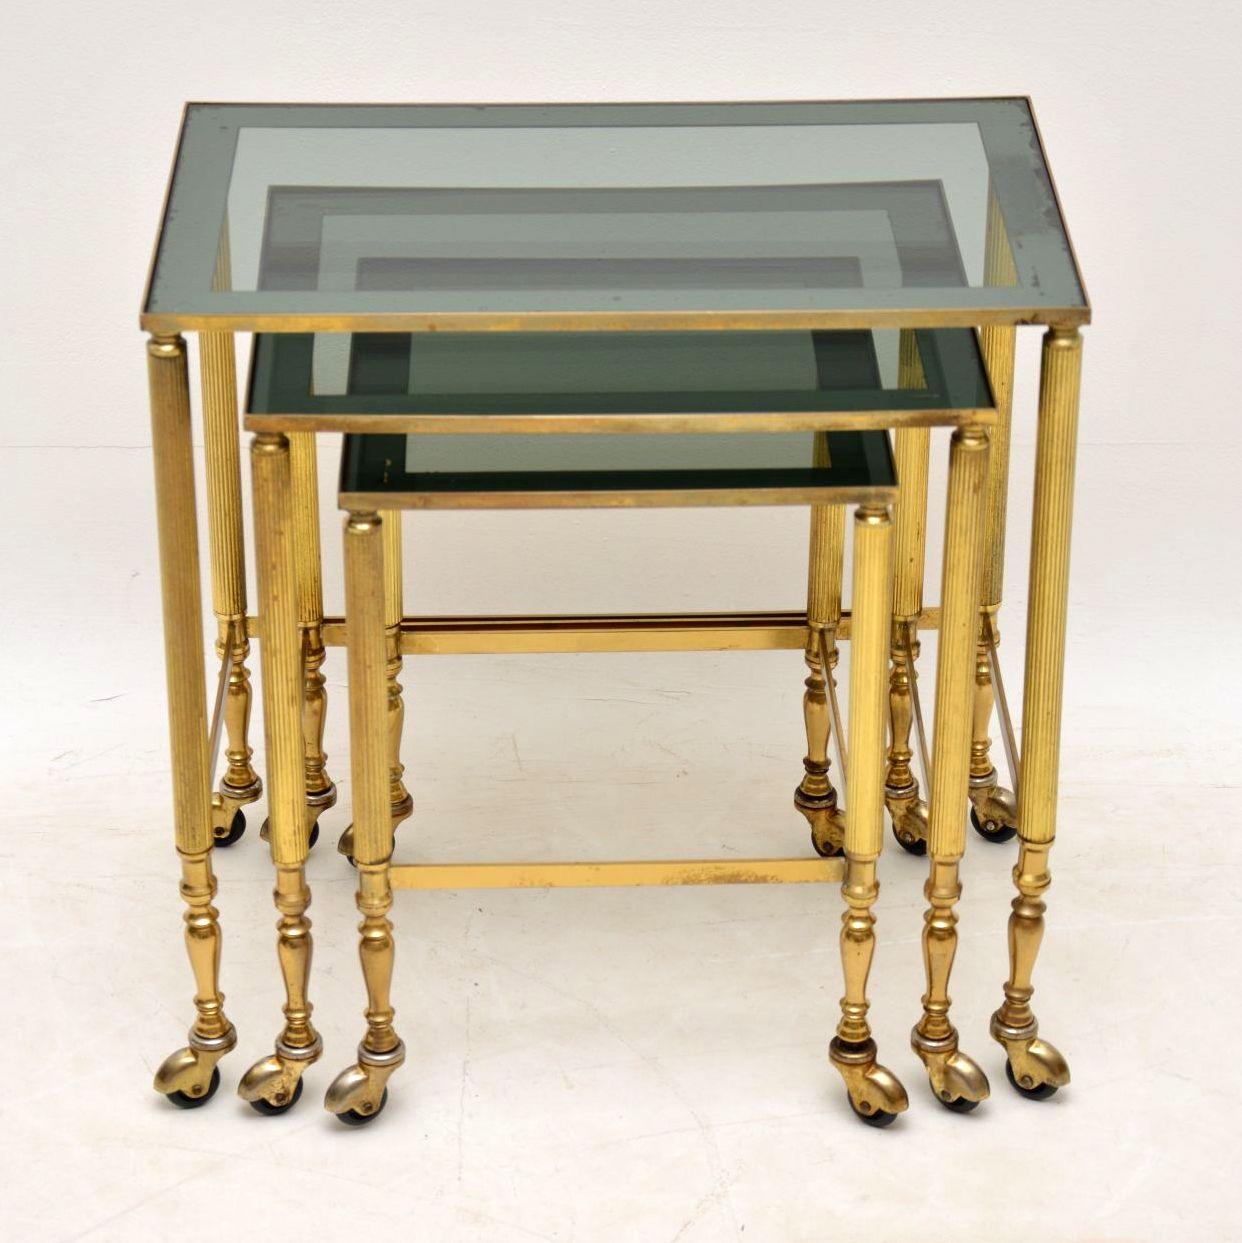 A stunning and very well made vintage brass nest of tables, these were made in France and date from the 1960s. They’re much better quality than the ones we usually find, they are in great vintage condition as well. All is clean, sturdy and sound,